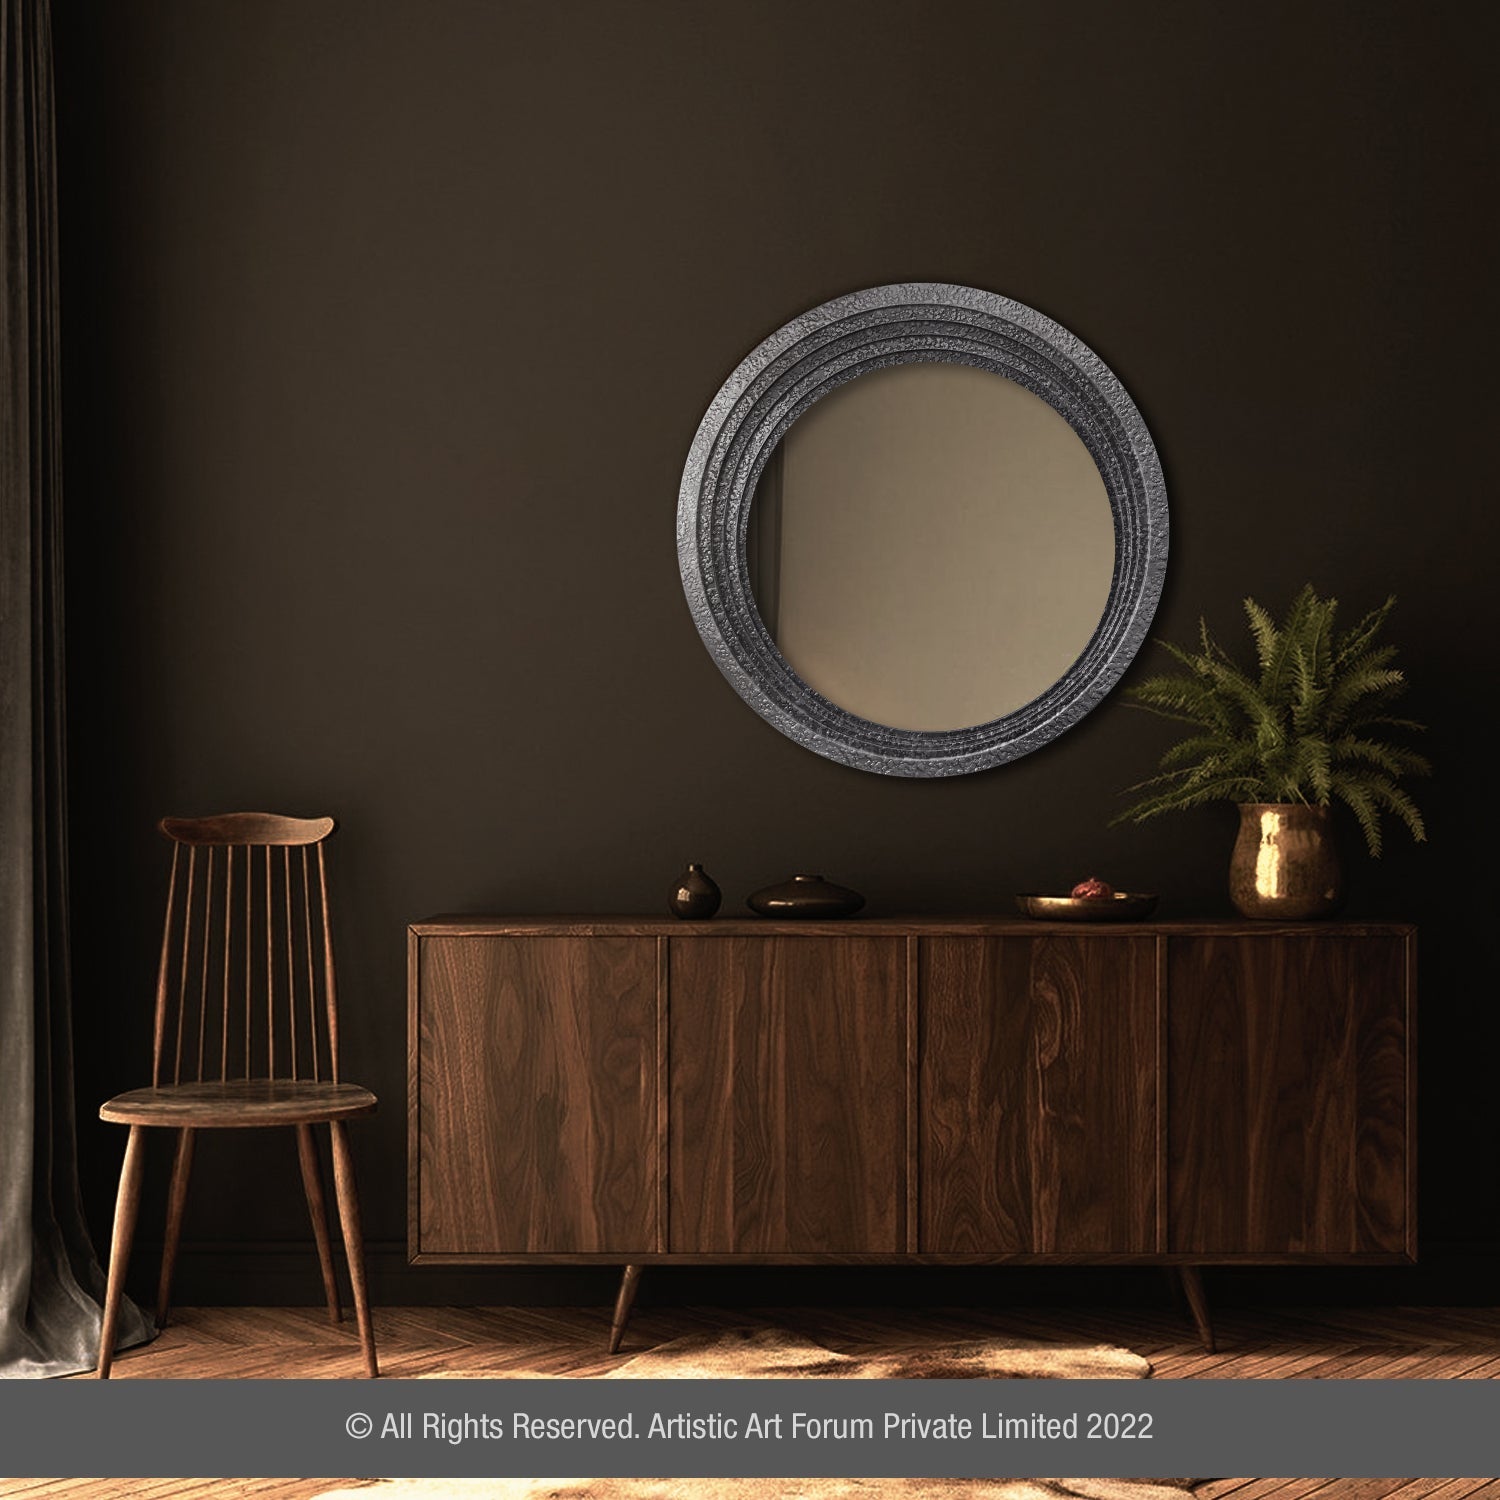 Circular White Metal Anqtique Wall Mirror | For Home Wall Decor